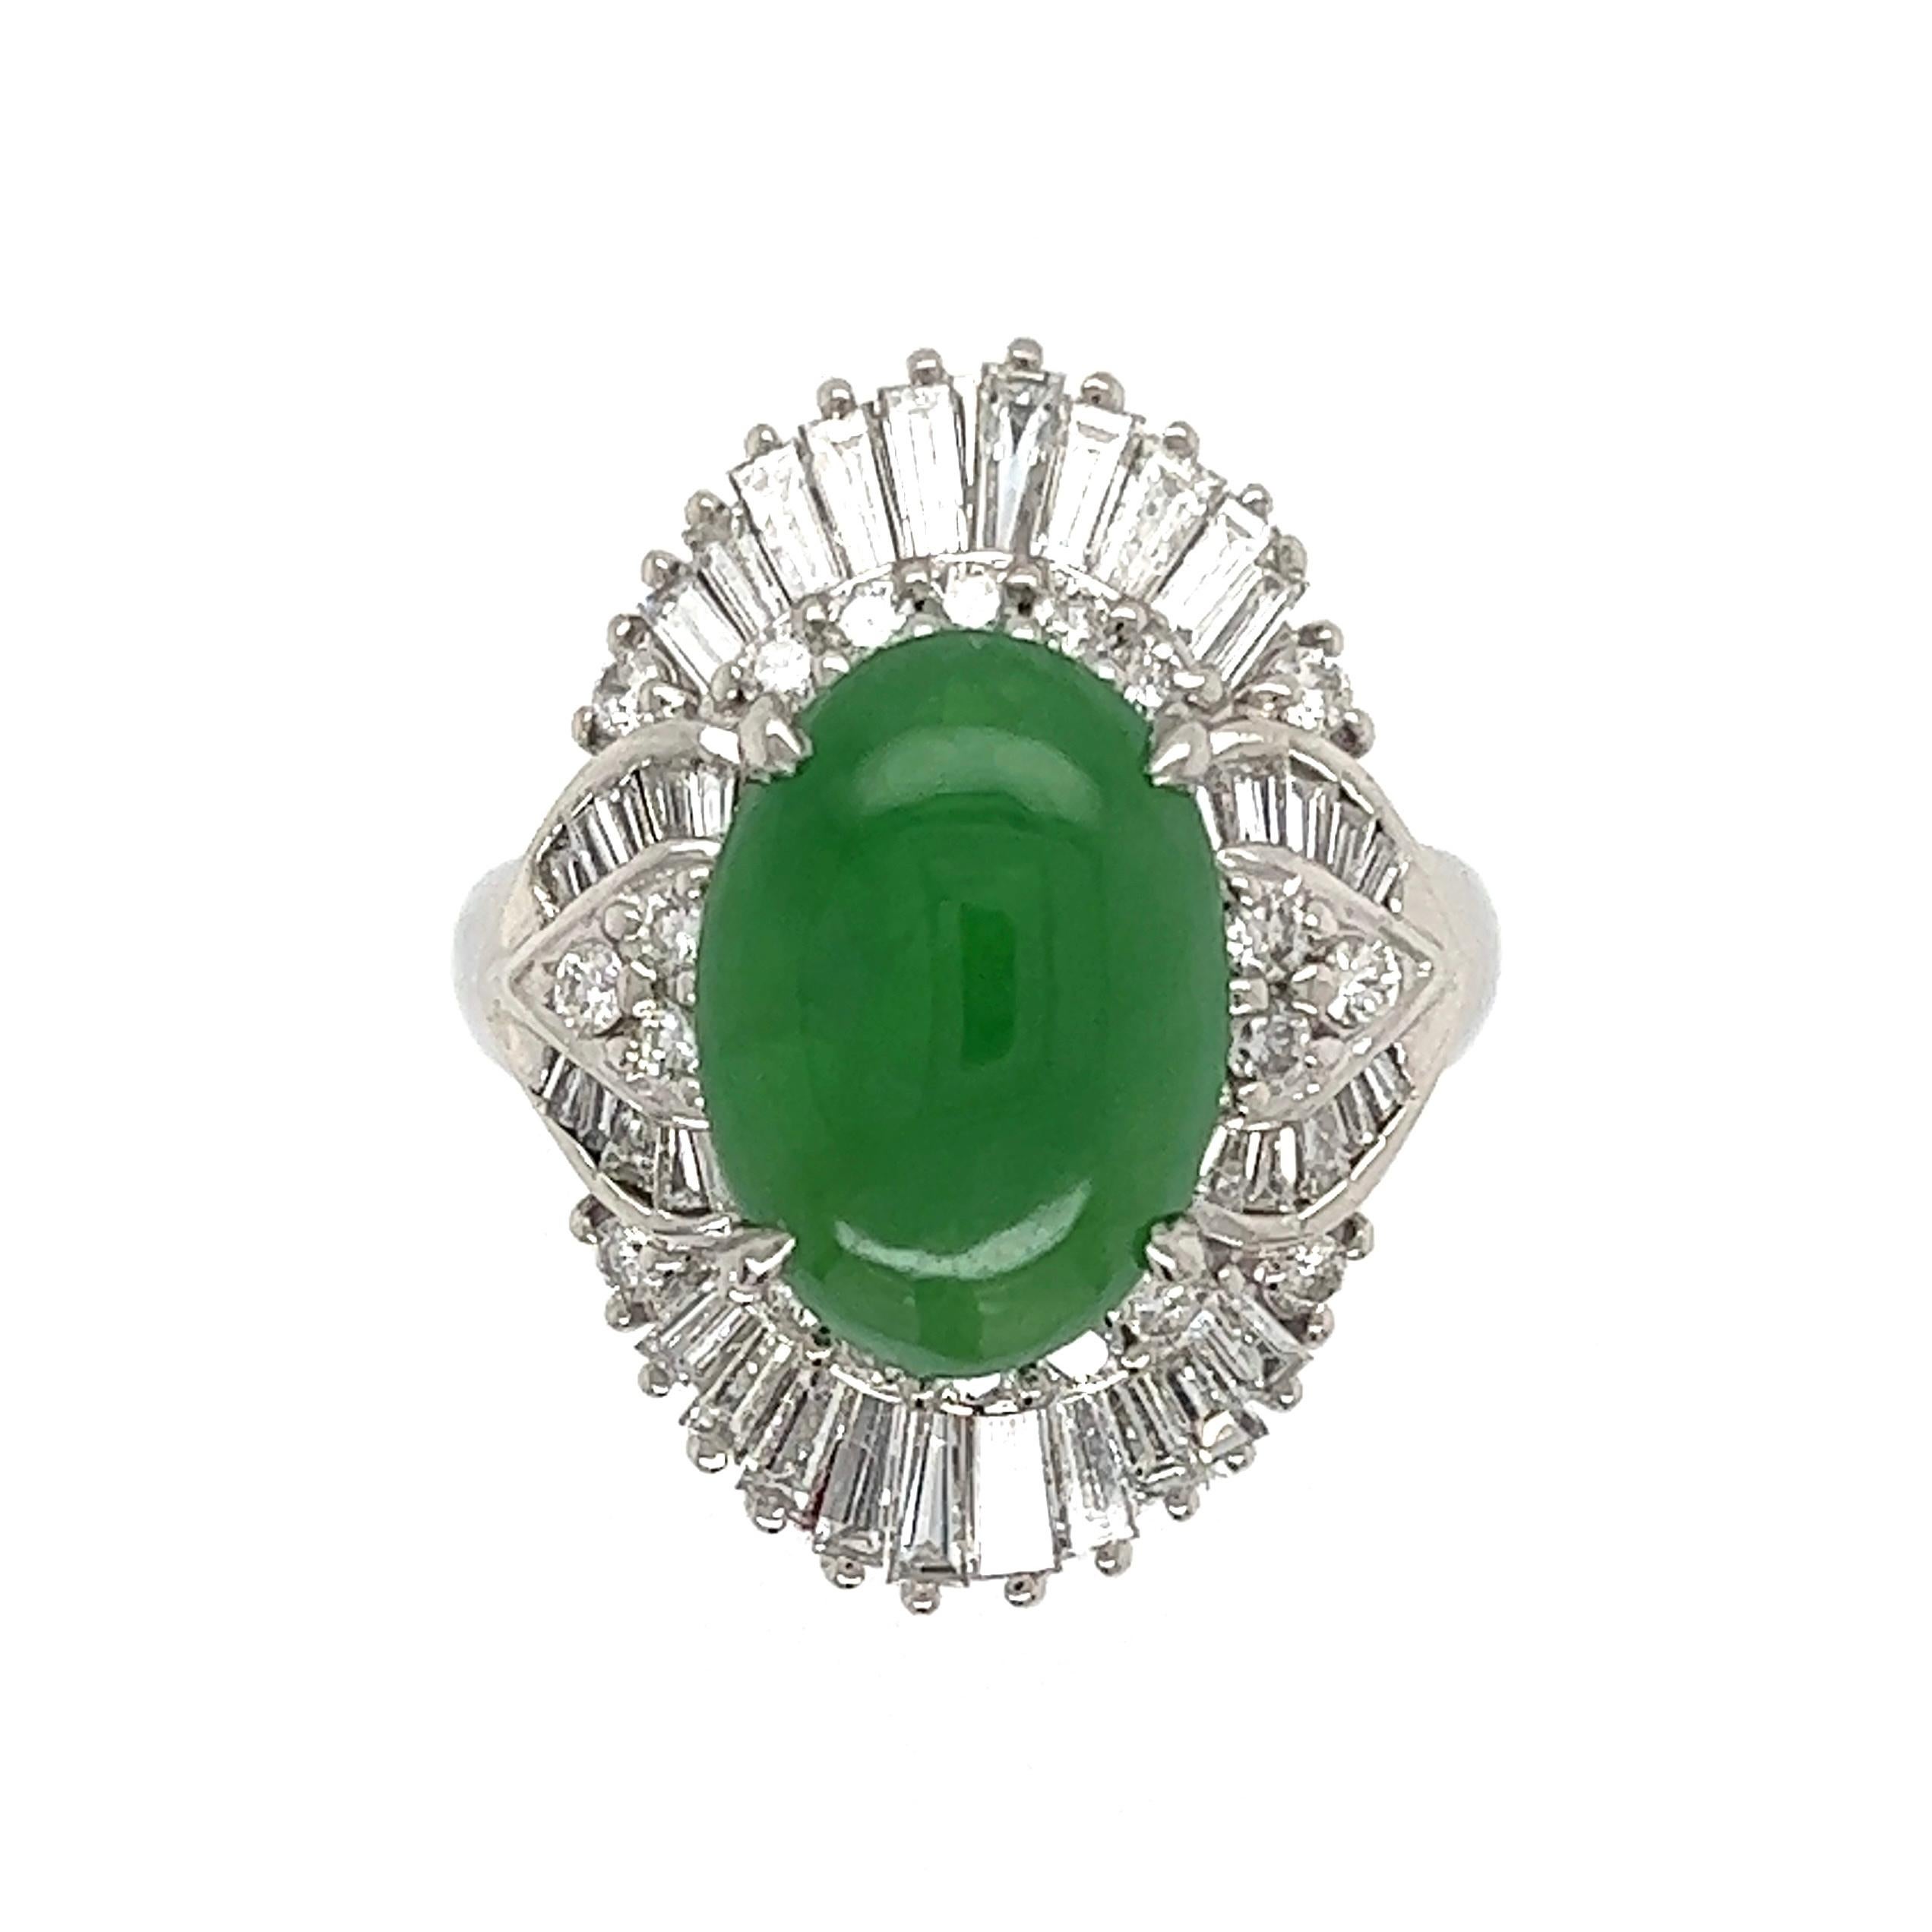 Simply Beautiful! Finely detailed Jadeite Jade and Diamond Ballerina Cocktail Ring. Centering a securely set awesome 4.72 Carat Cabochon Jadeite Jade, surrounded by Diamonds, weighing approx. 1.47tcw. Hand crafted Platinum mounting. Approx.